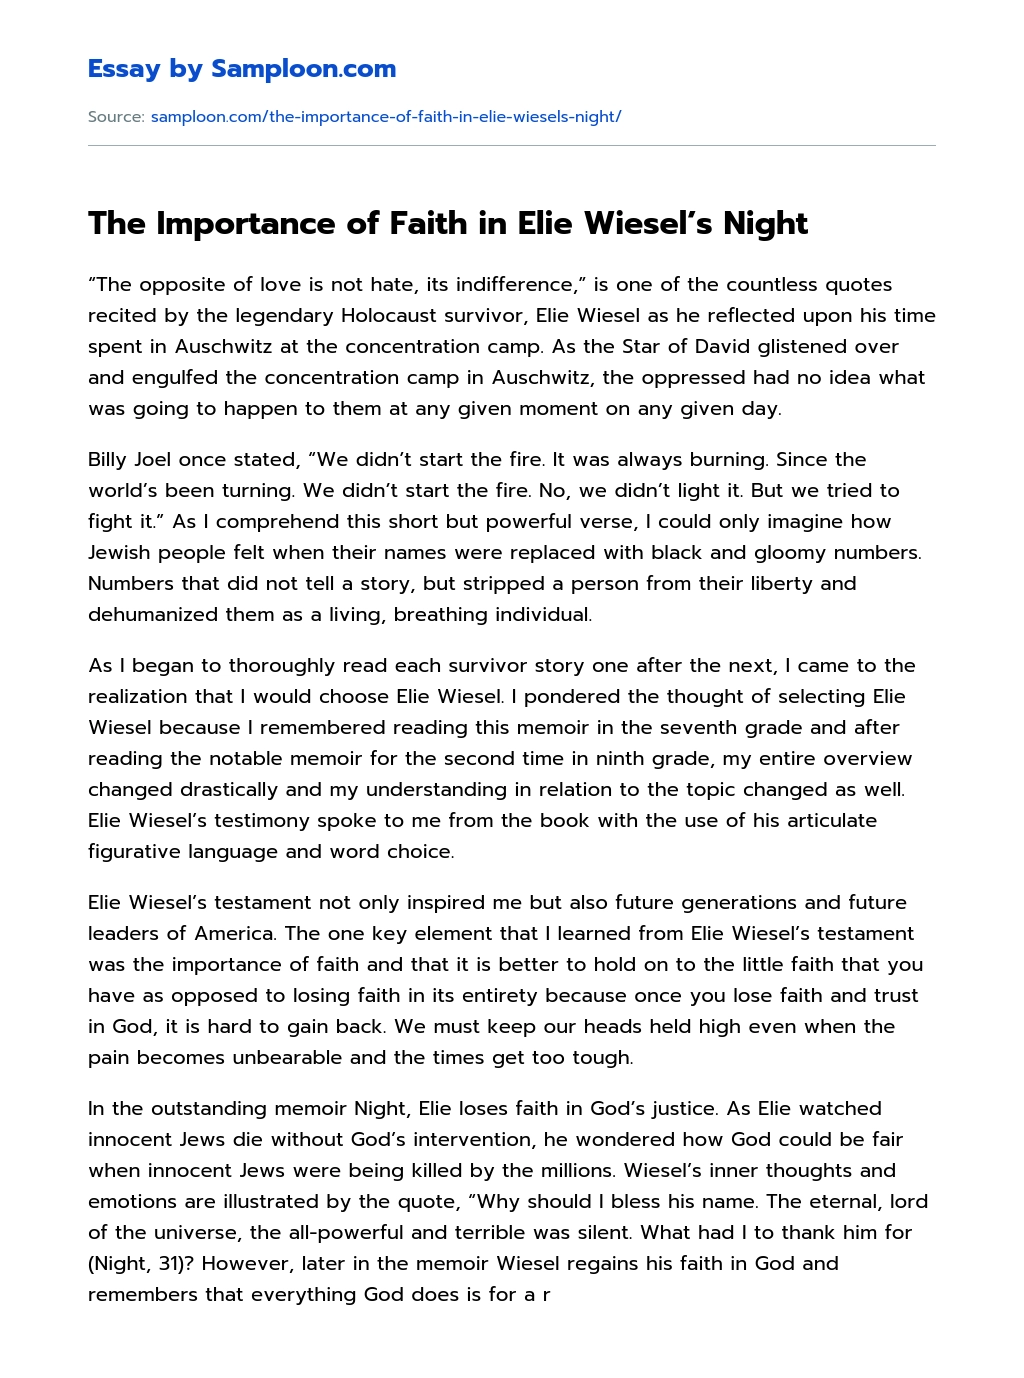 The Importance of Faith in Elie Wiesel’s Night essay